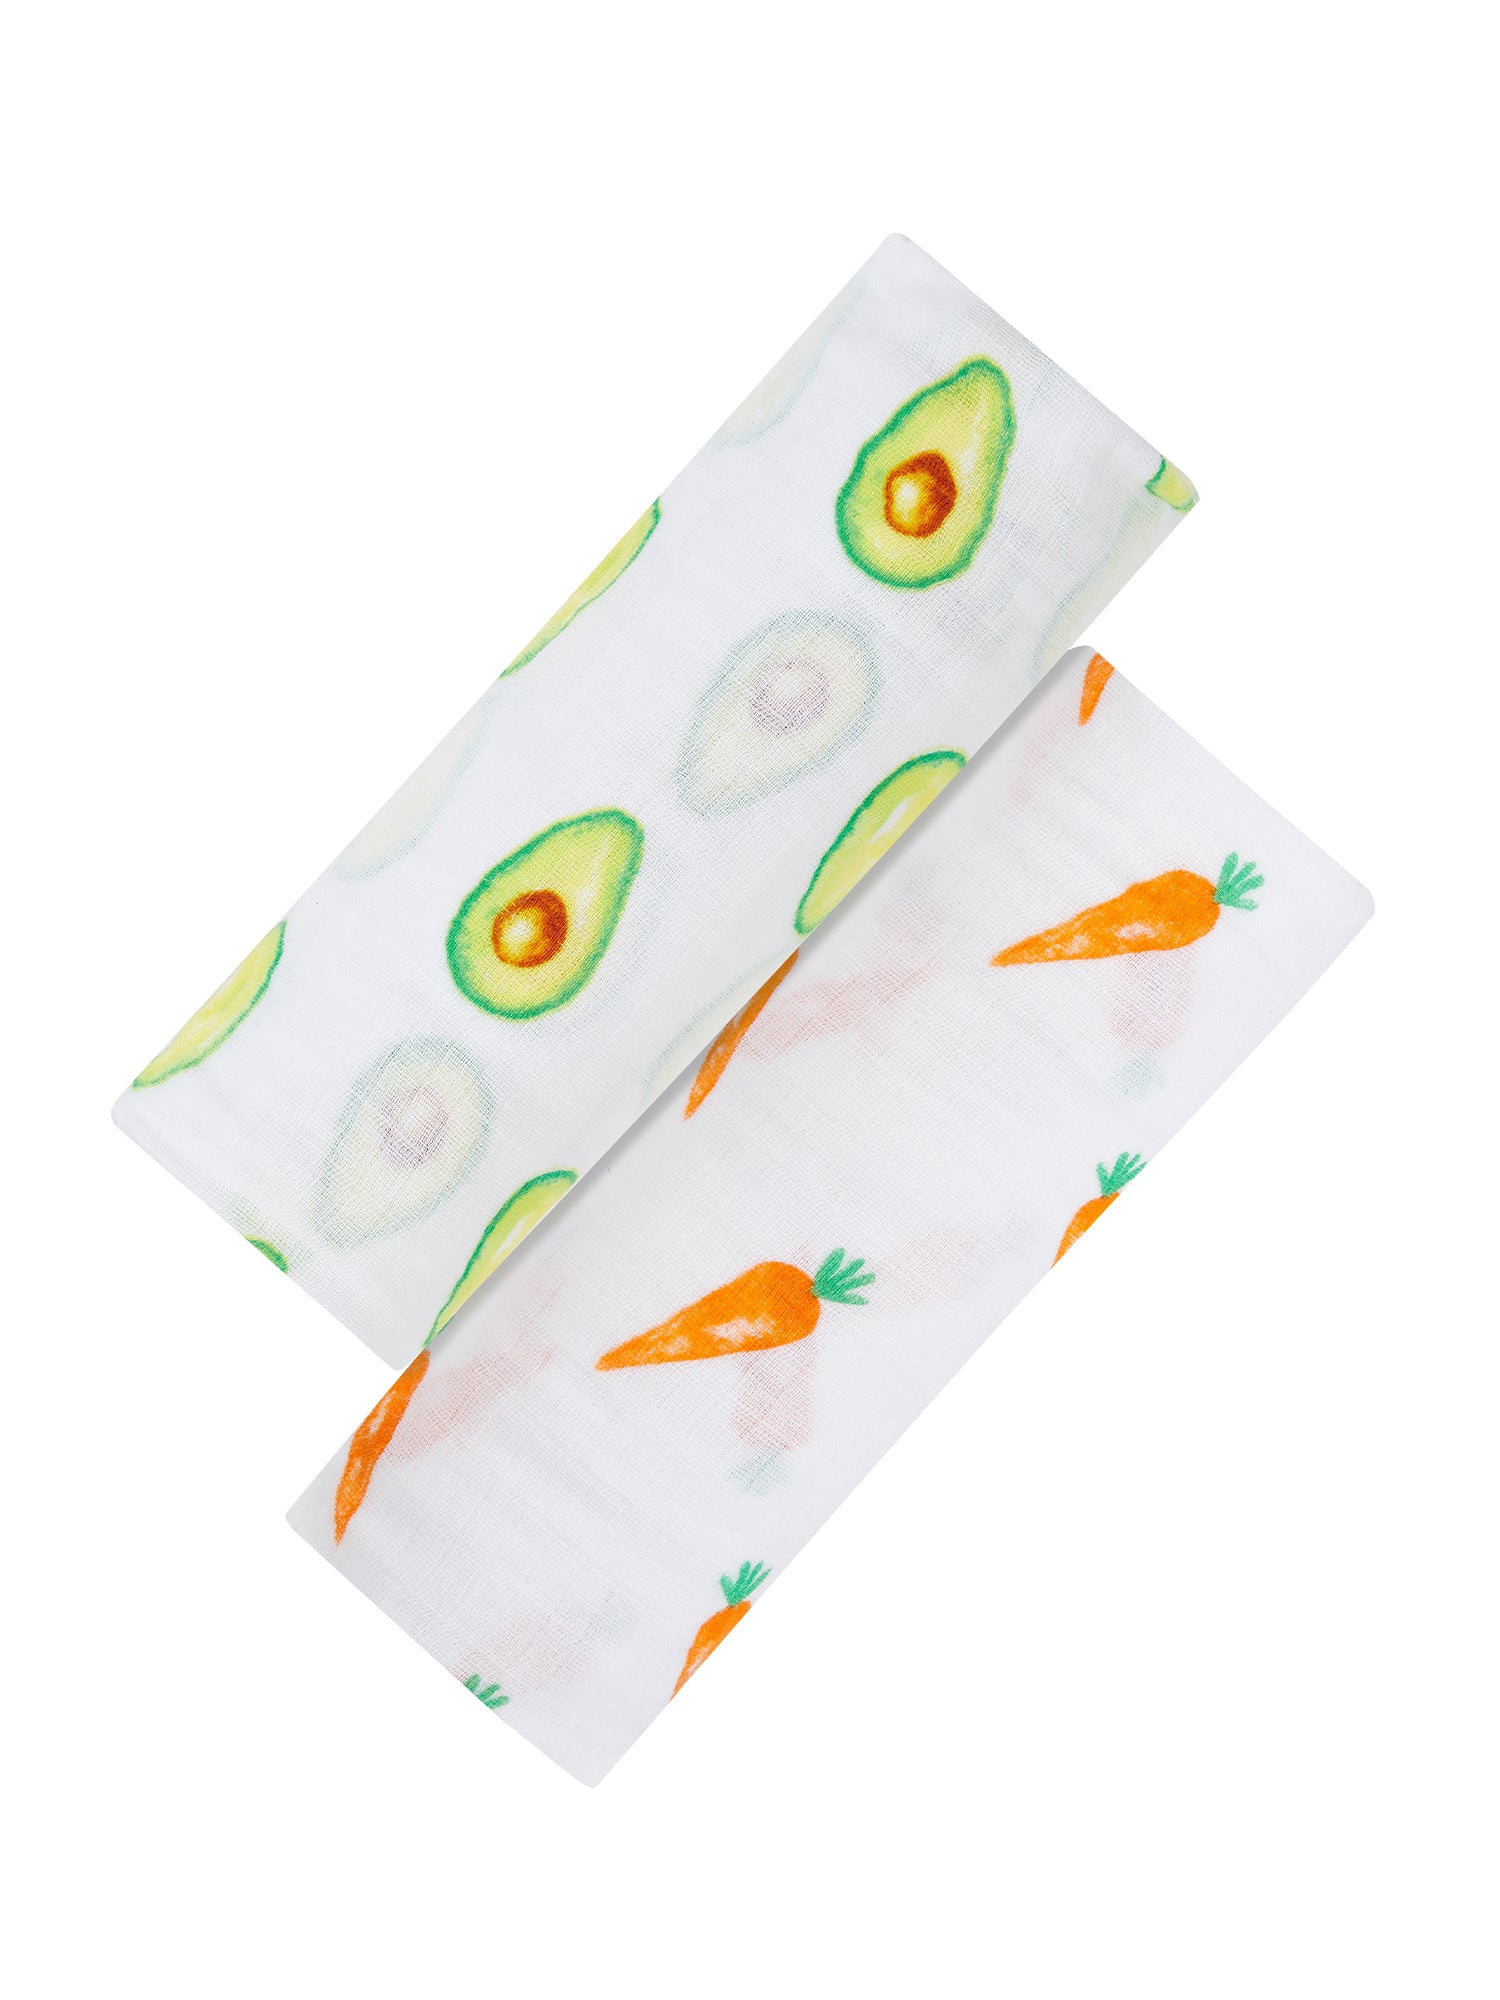 Organic Swaddle Set - First Foods (Avocado & Carrot)